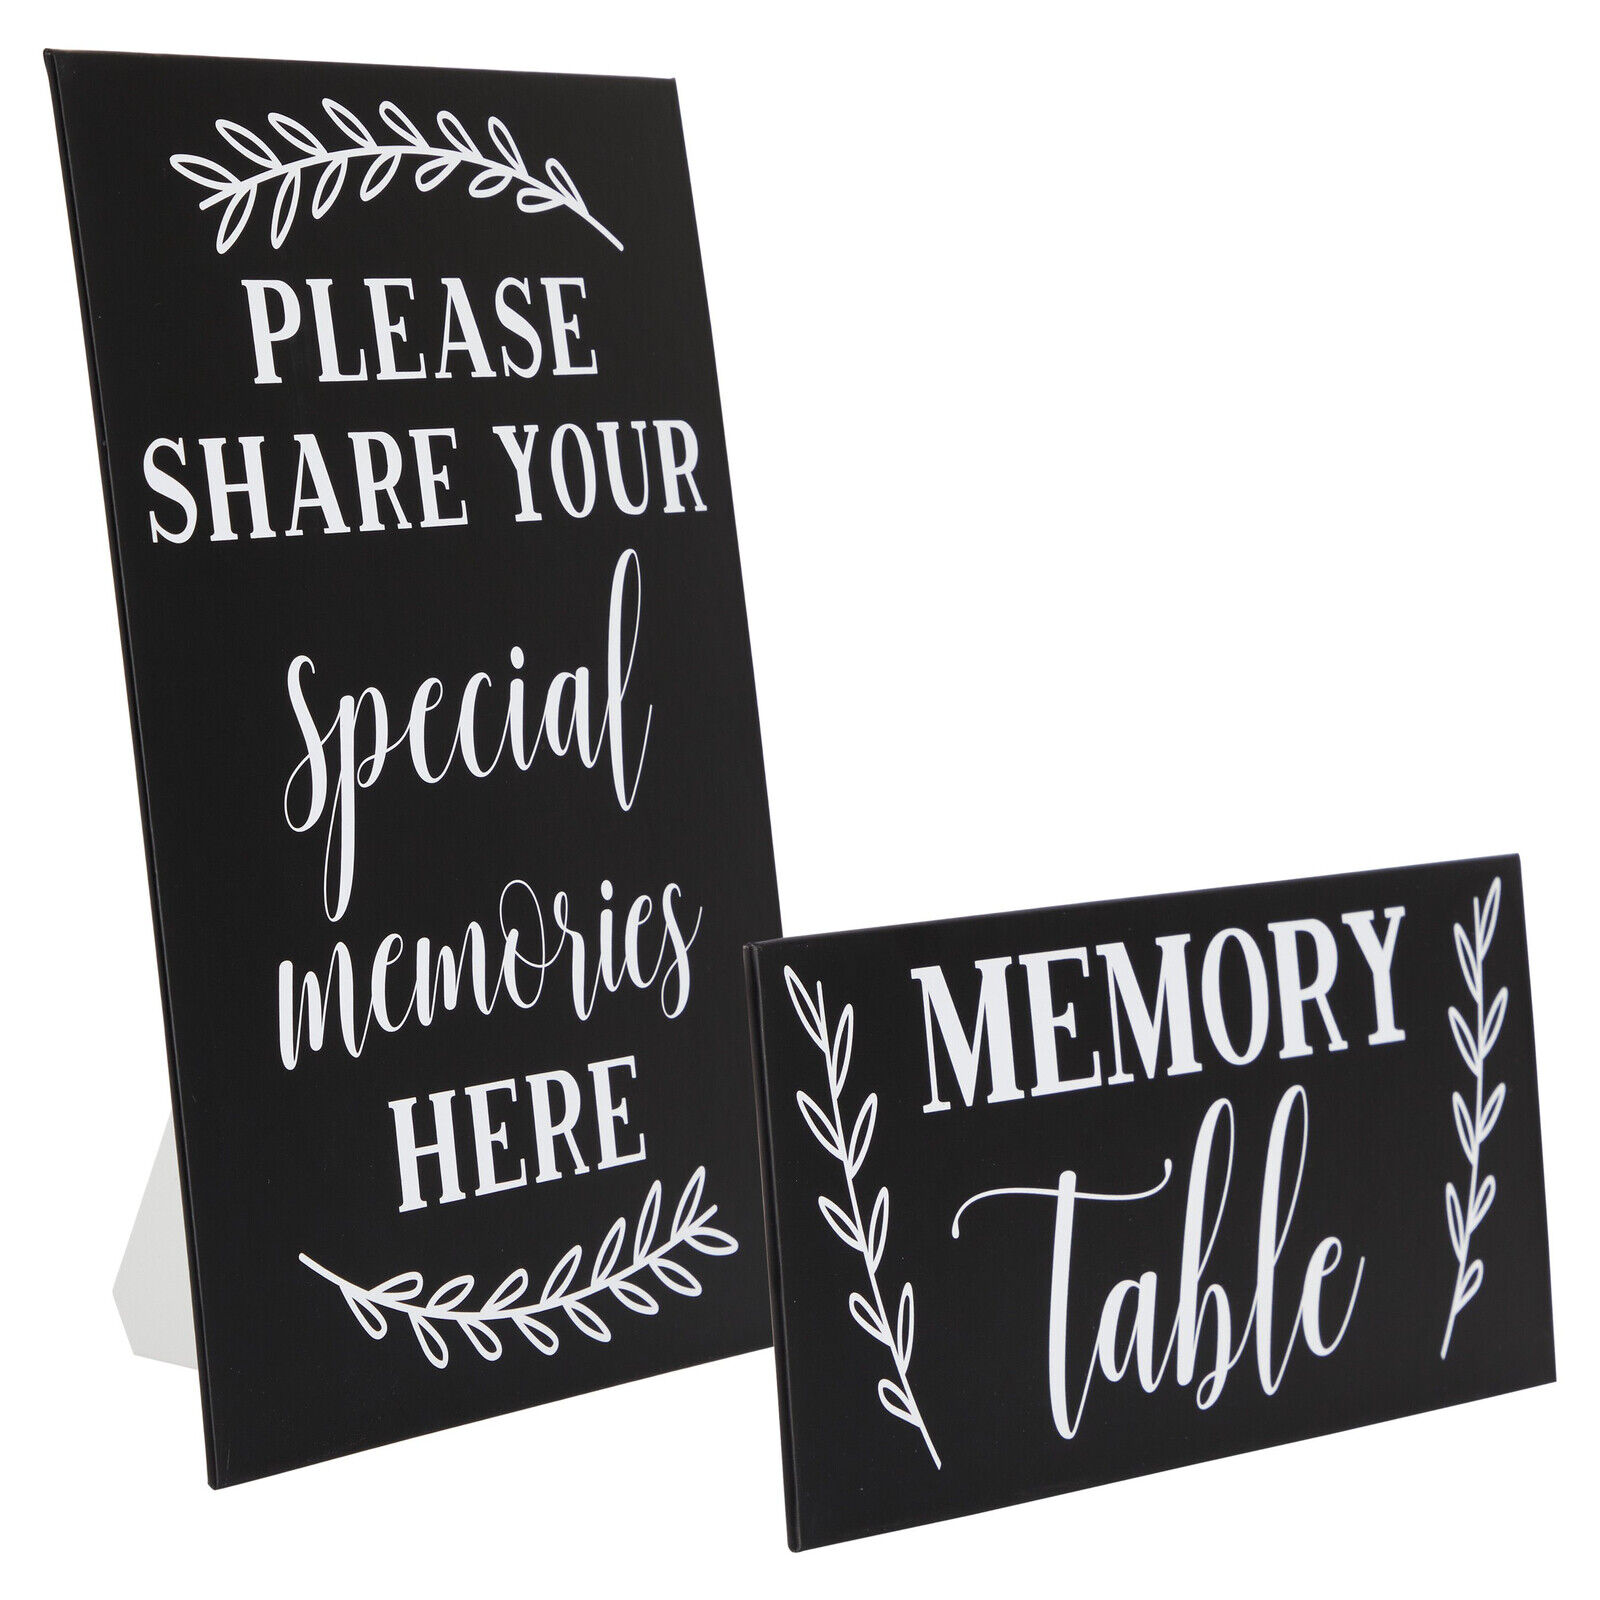 2 Pack Black Memorial Service Guest Book Signs For Funeral, Celebration Of Life